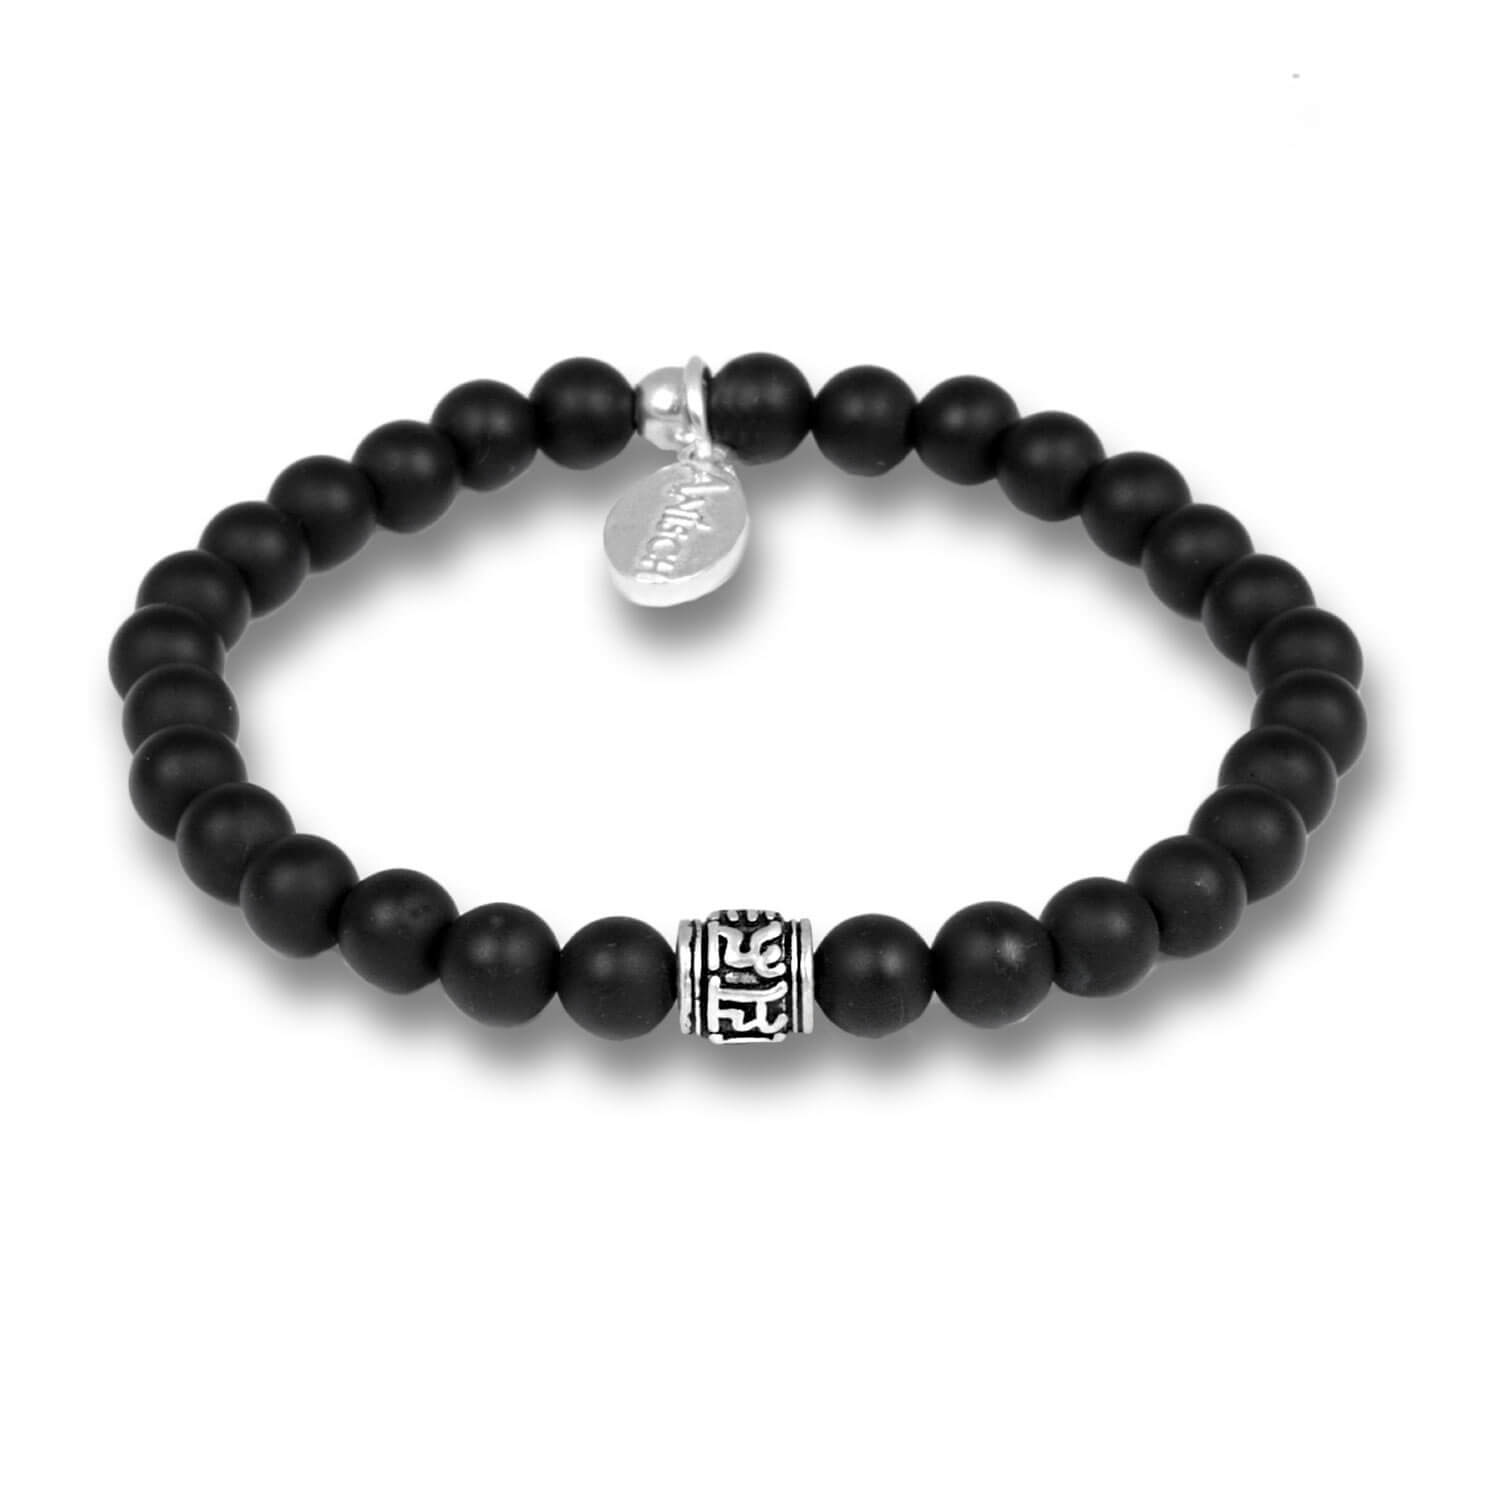 Little Onyx - Mantra Beads gemstone bracelet for men with sterling silver, 6 mm